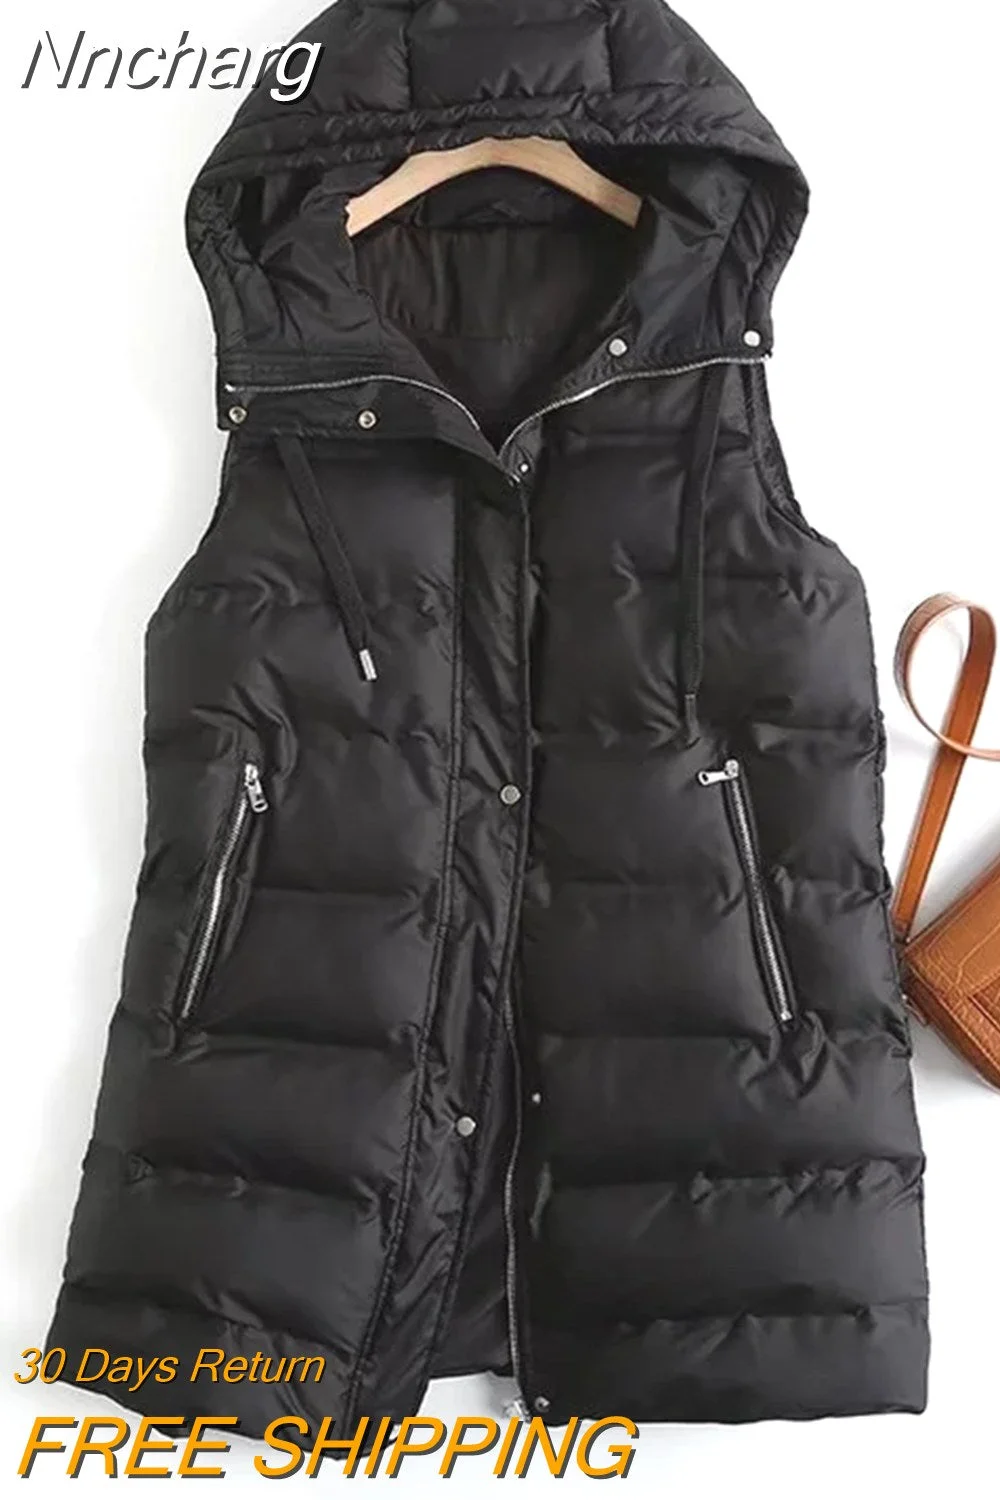 Nncharge Waistcoat Vest For Women Puff Hooded Vest 2023 Casual Sleeveless Jackets Chic Lady Winter Warm Jacket Coats Outfits Traf